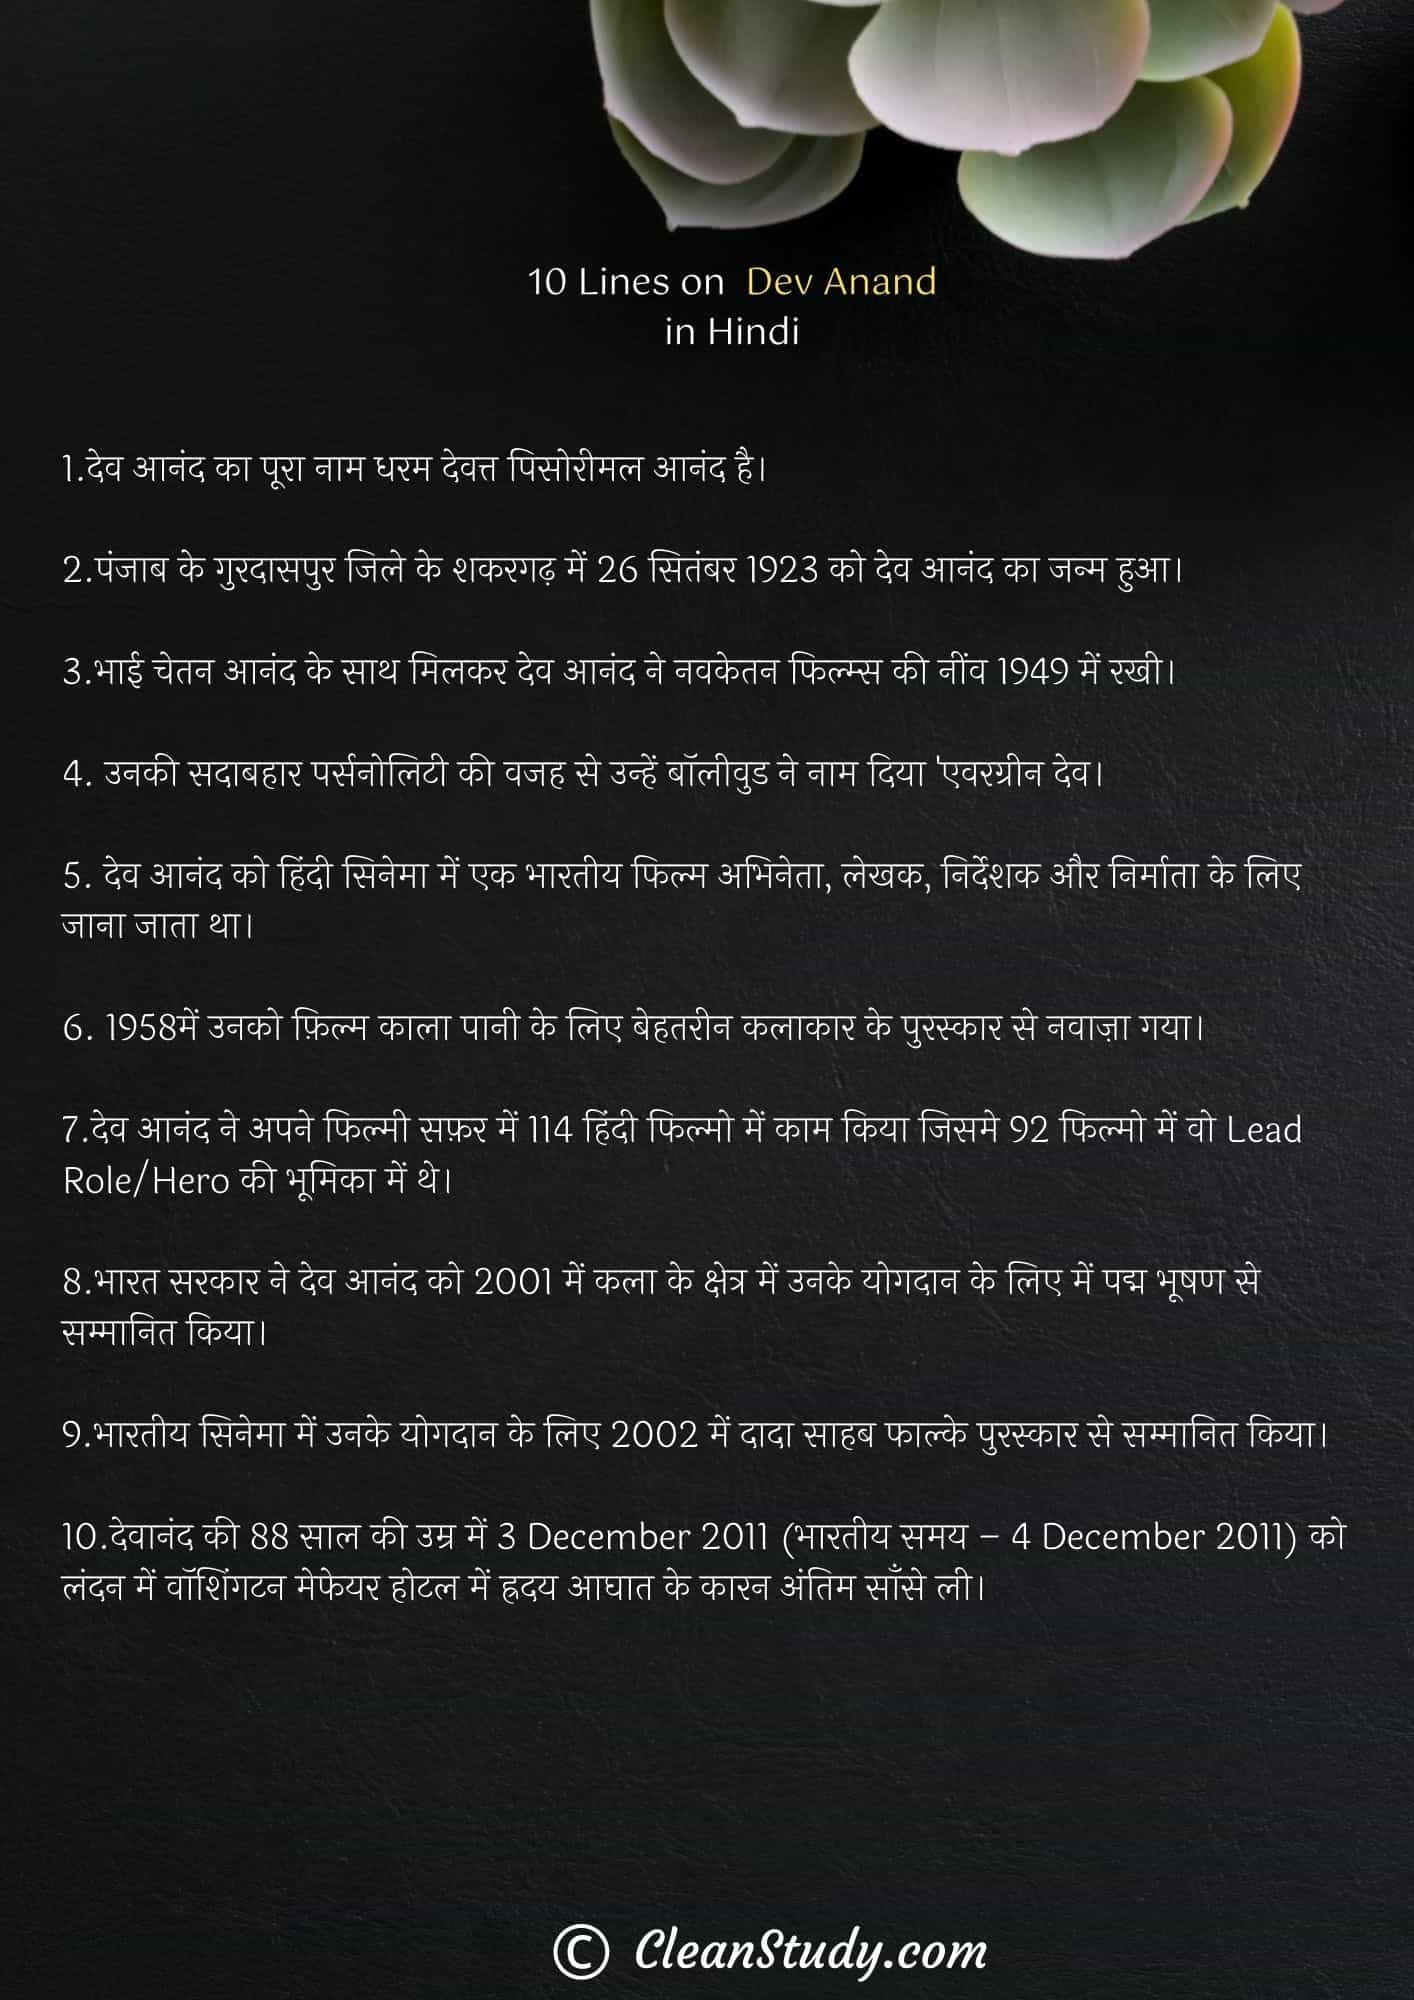 10 Lines on Dev Anand in Hindi